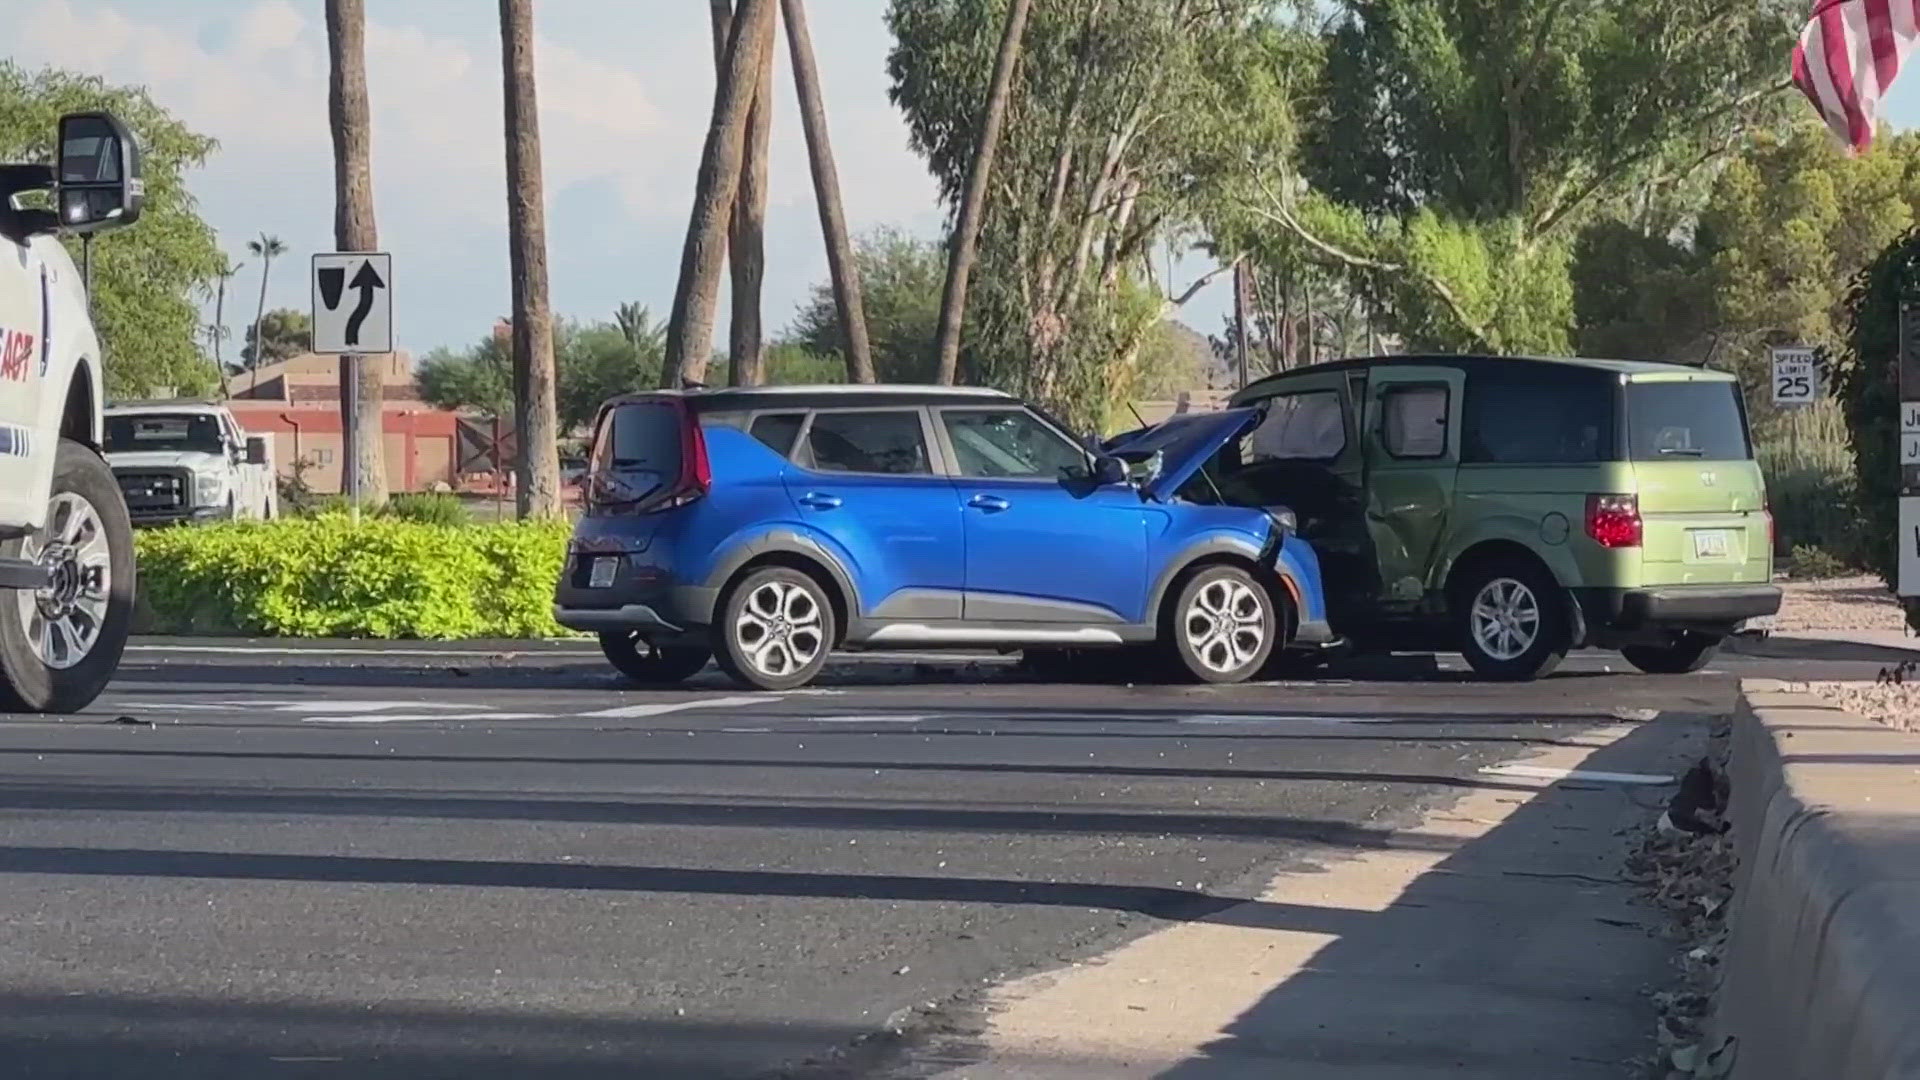 67-year-old Rita Halverson was killed after she ran a red light and collided with another car in Sun Lakes. Watch the video above for more information.